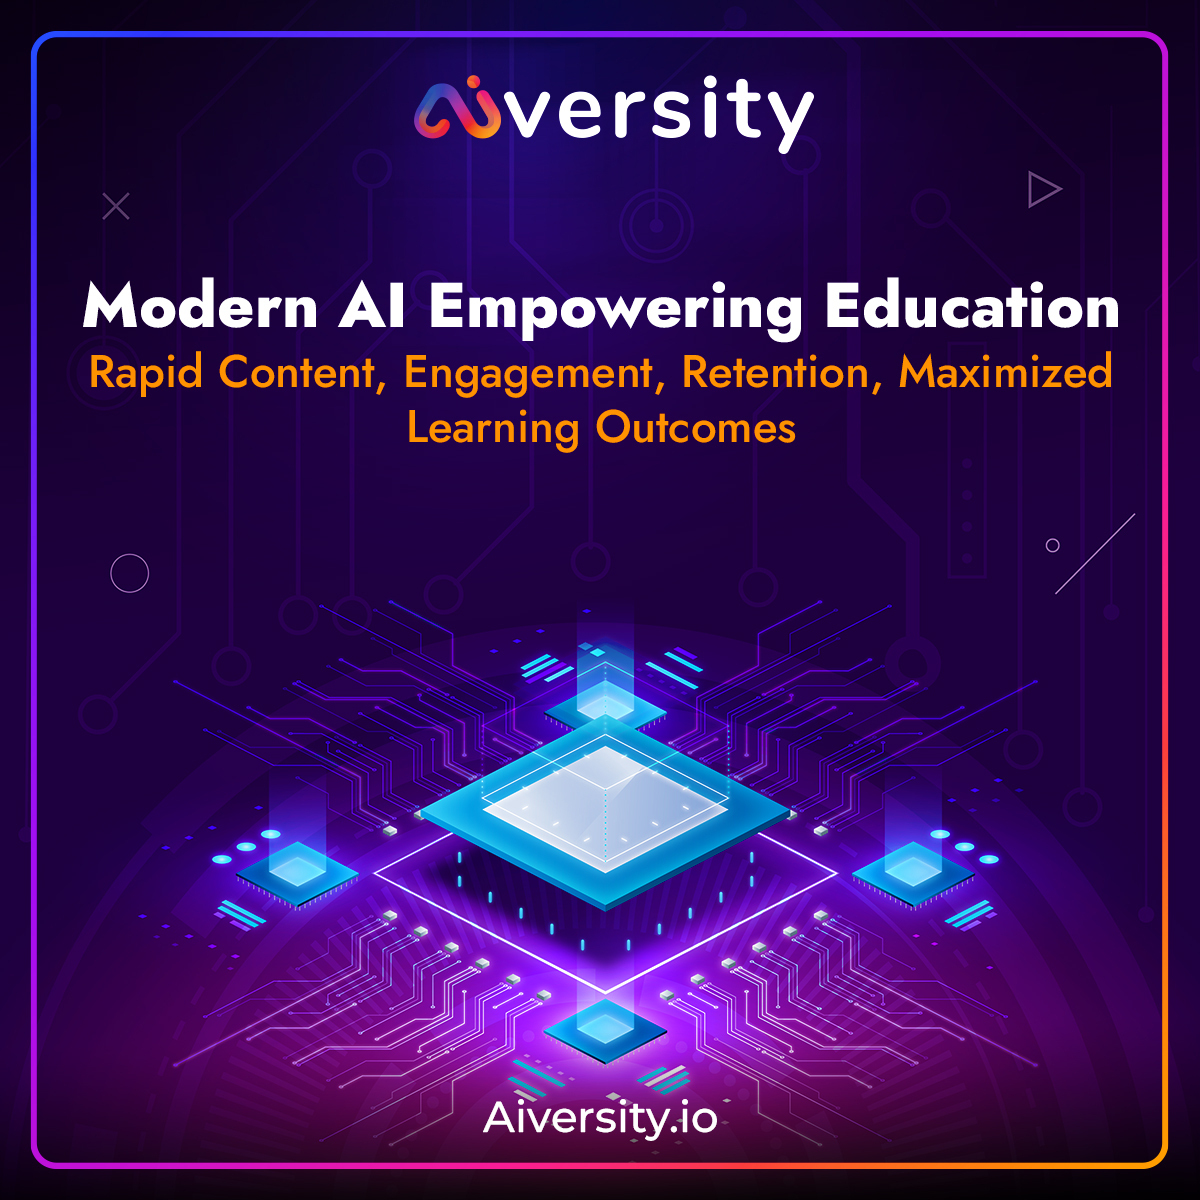 Witness how our AI-driven Learning Management System revolutionizes and empowers education like never before. Step into the future of learning with cutting-edge technology at your fingertips!

aiversity.io

#EmpoweringEducation #AIInnovation #AIEdtech